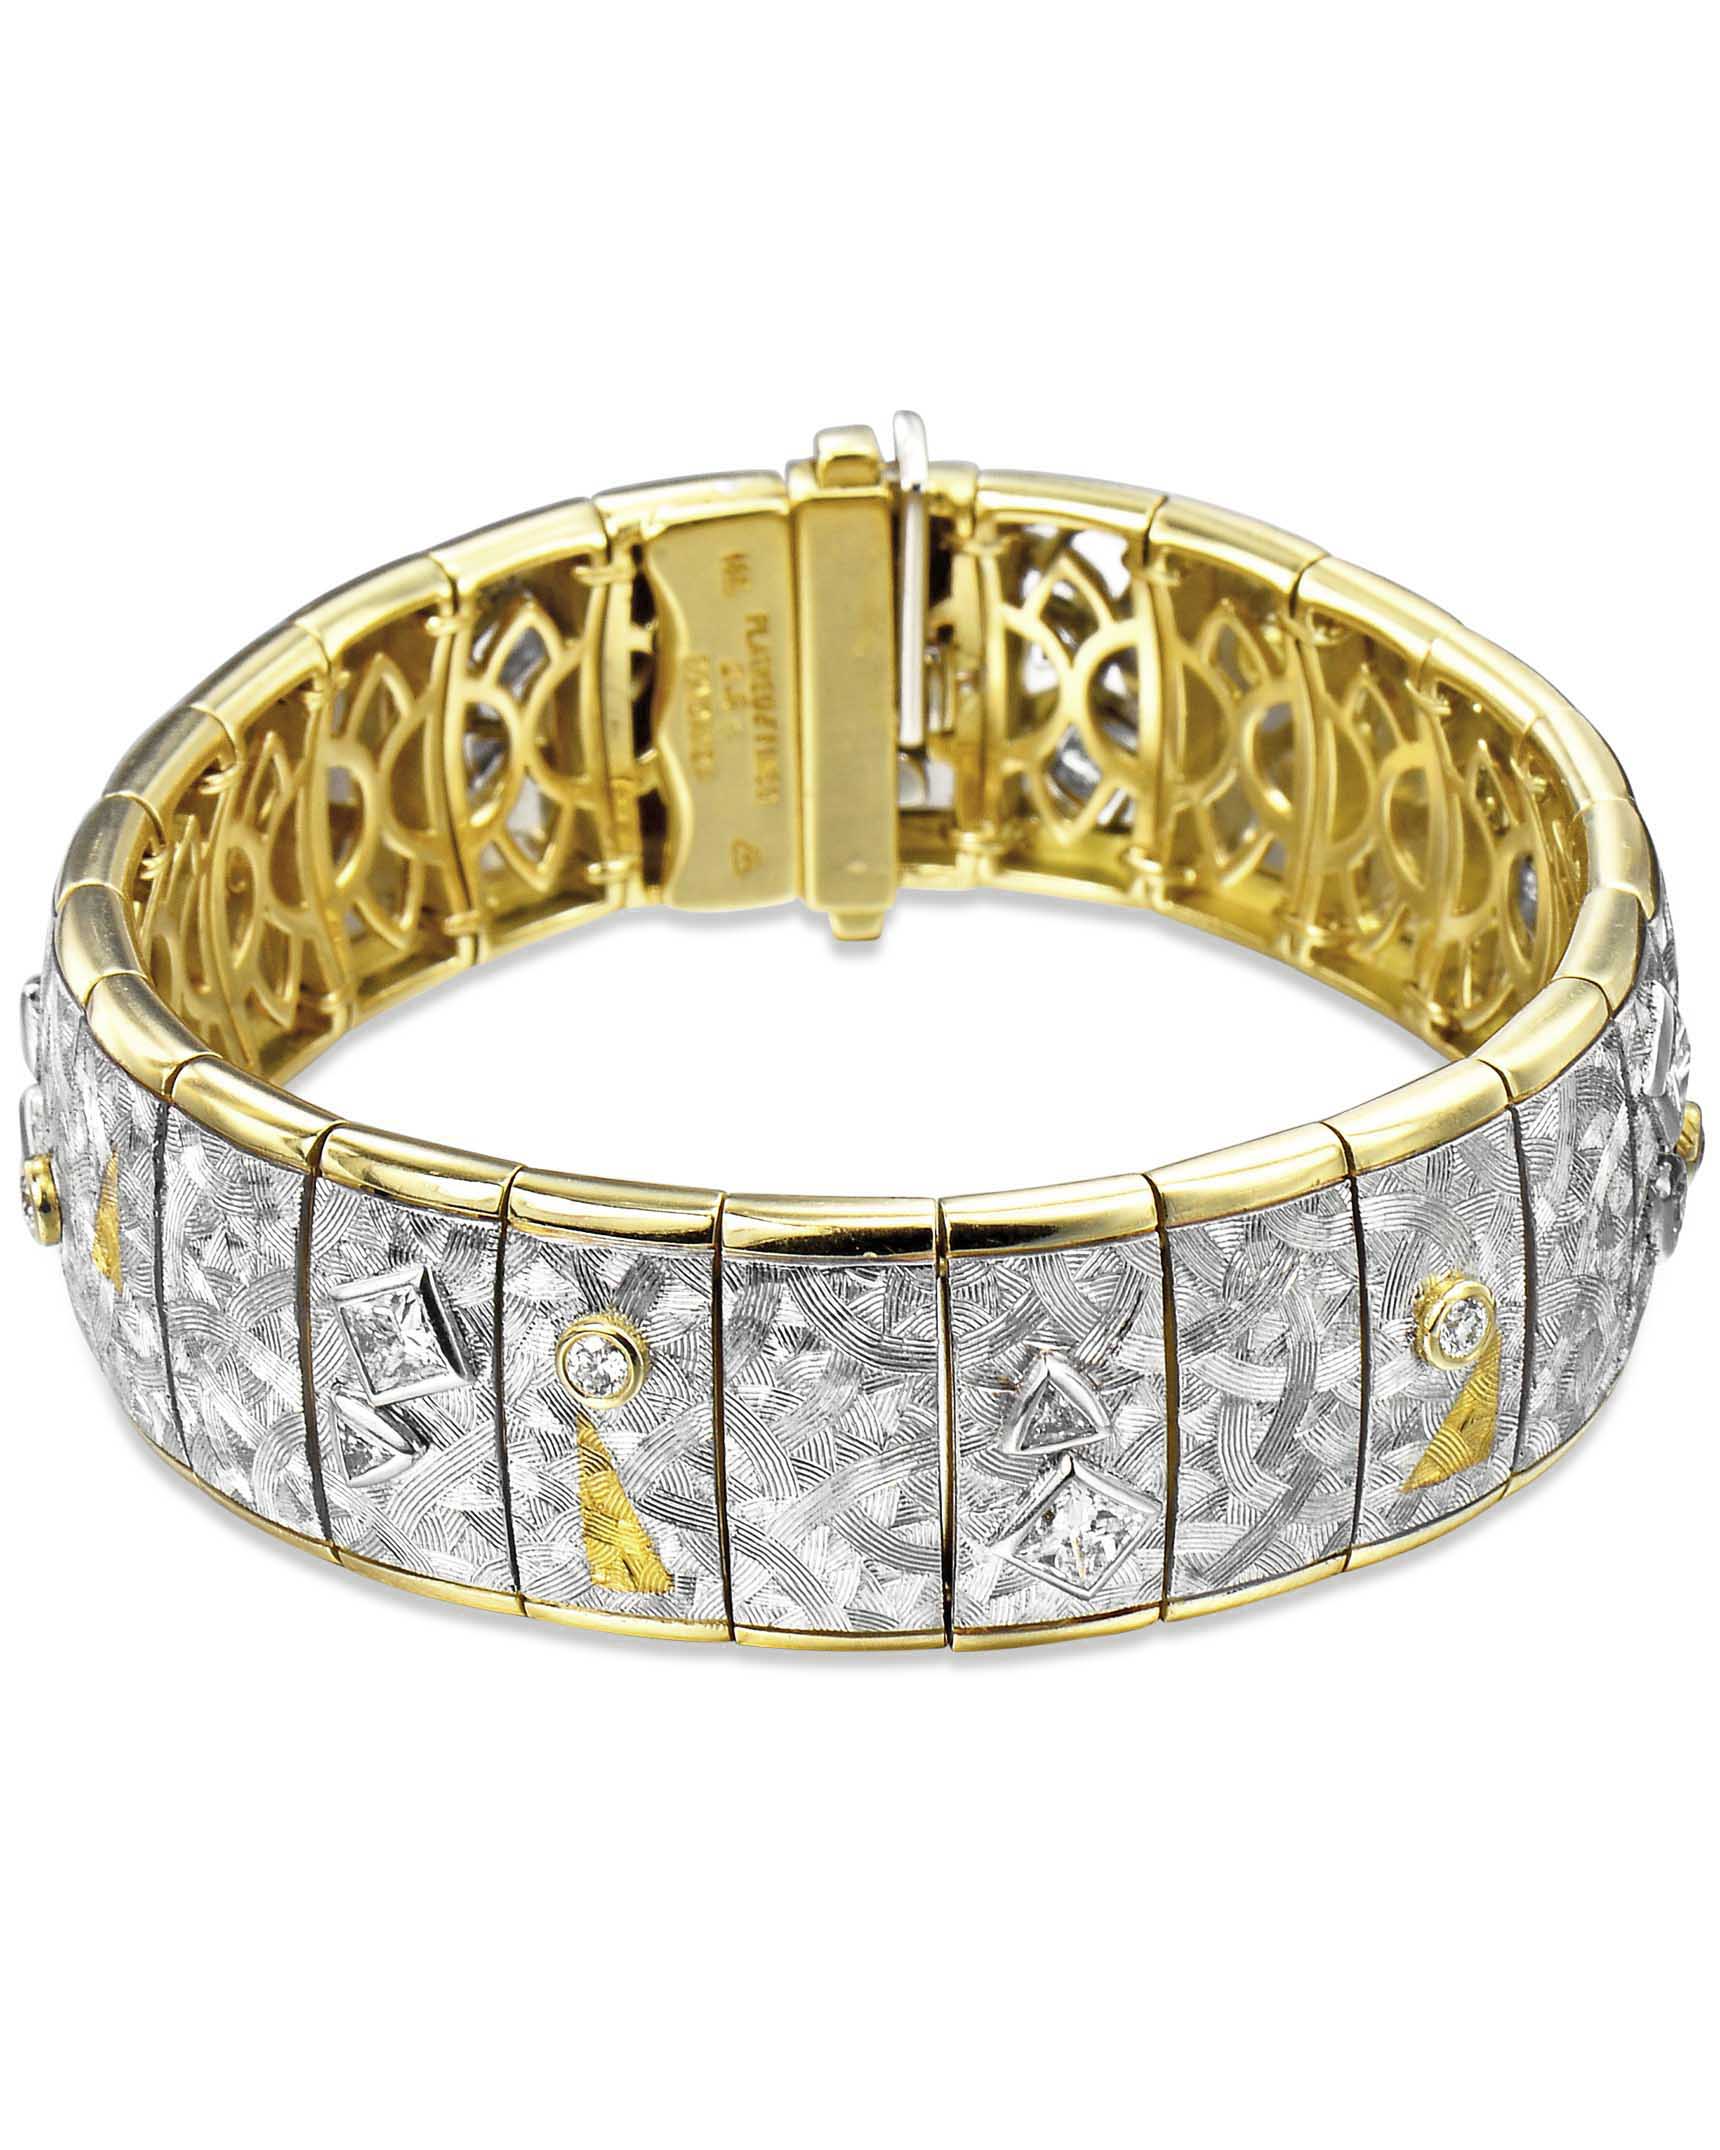 925 Sterling Silver 24K Gold Plated Bracelet, GCBR01, 9.8 Gm at Rs  1470/piece in Jaipur